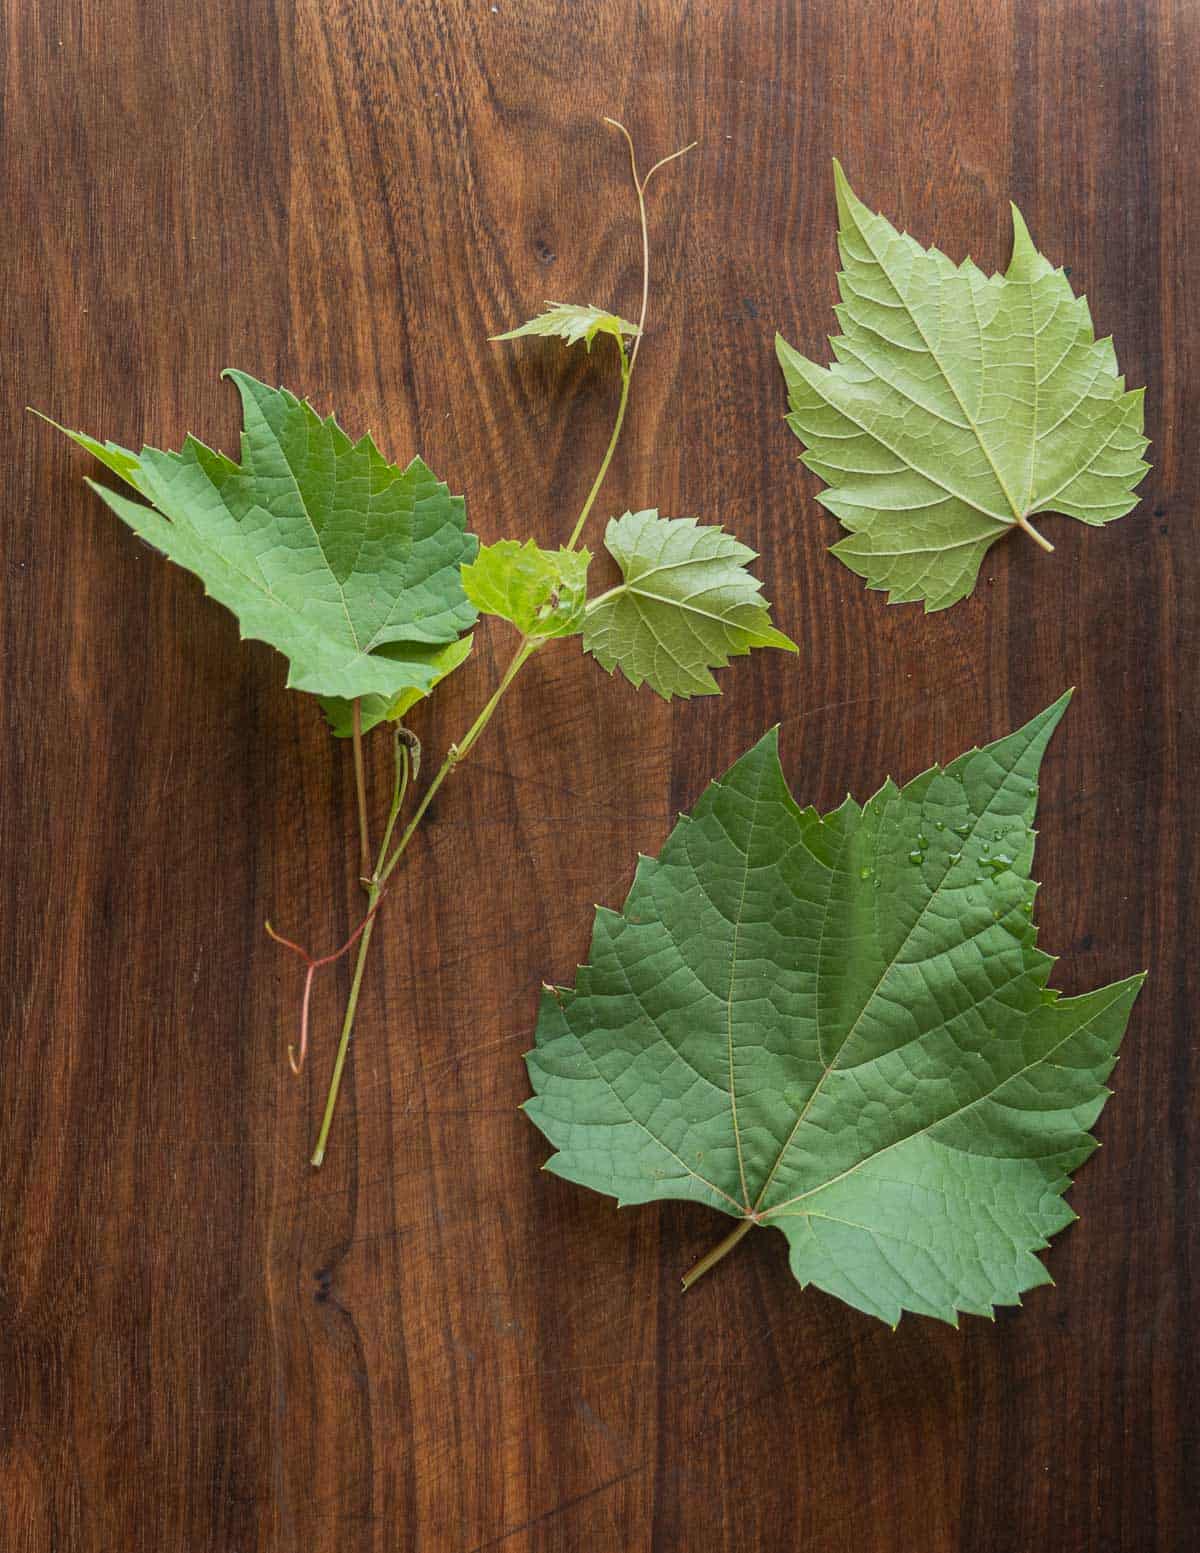 Grape vines and leaves laid out on a table for identification. 